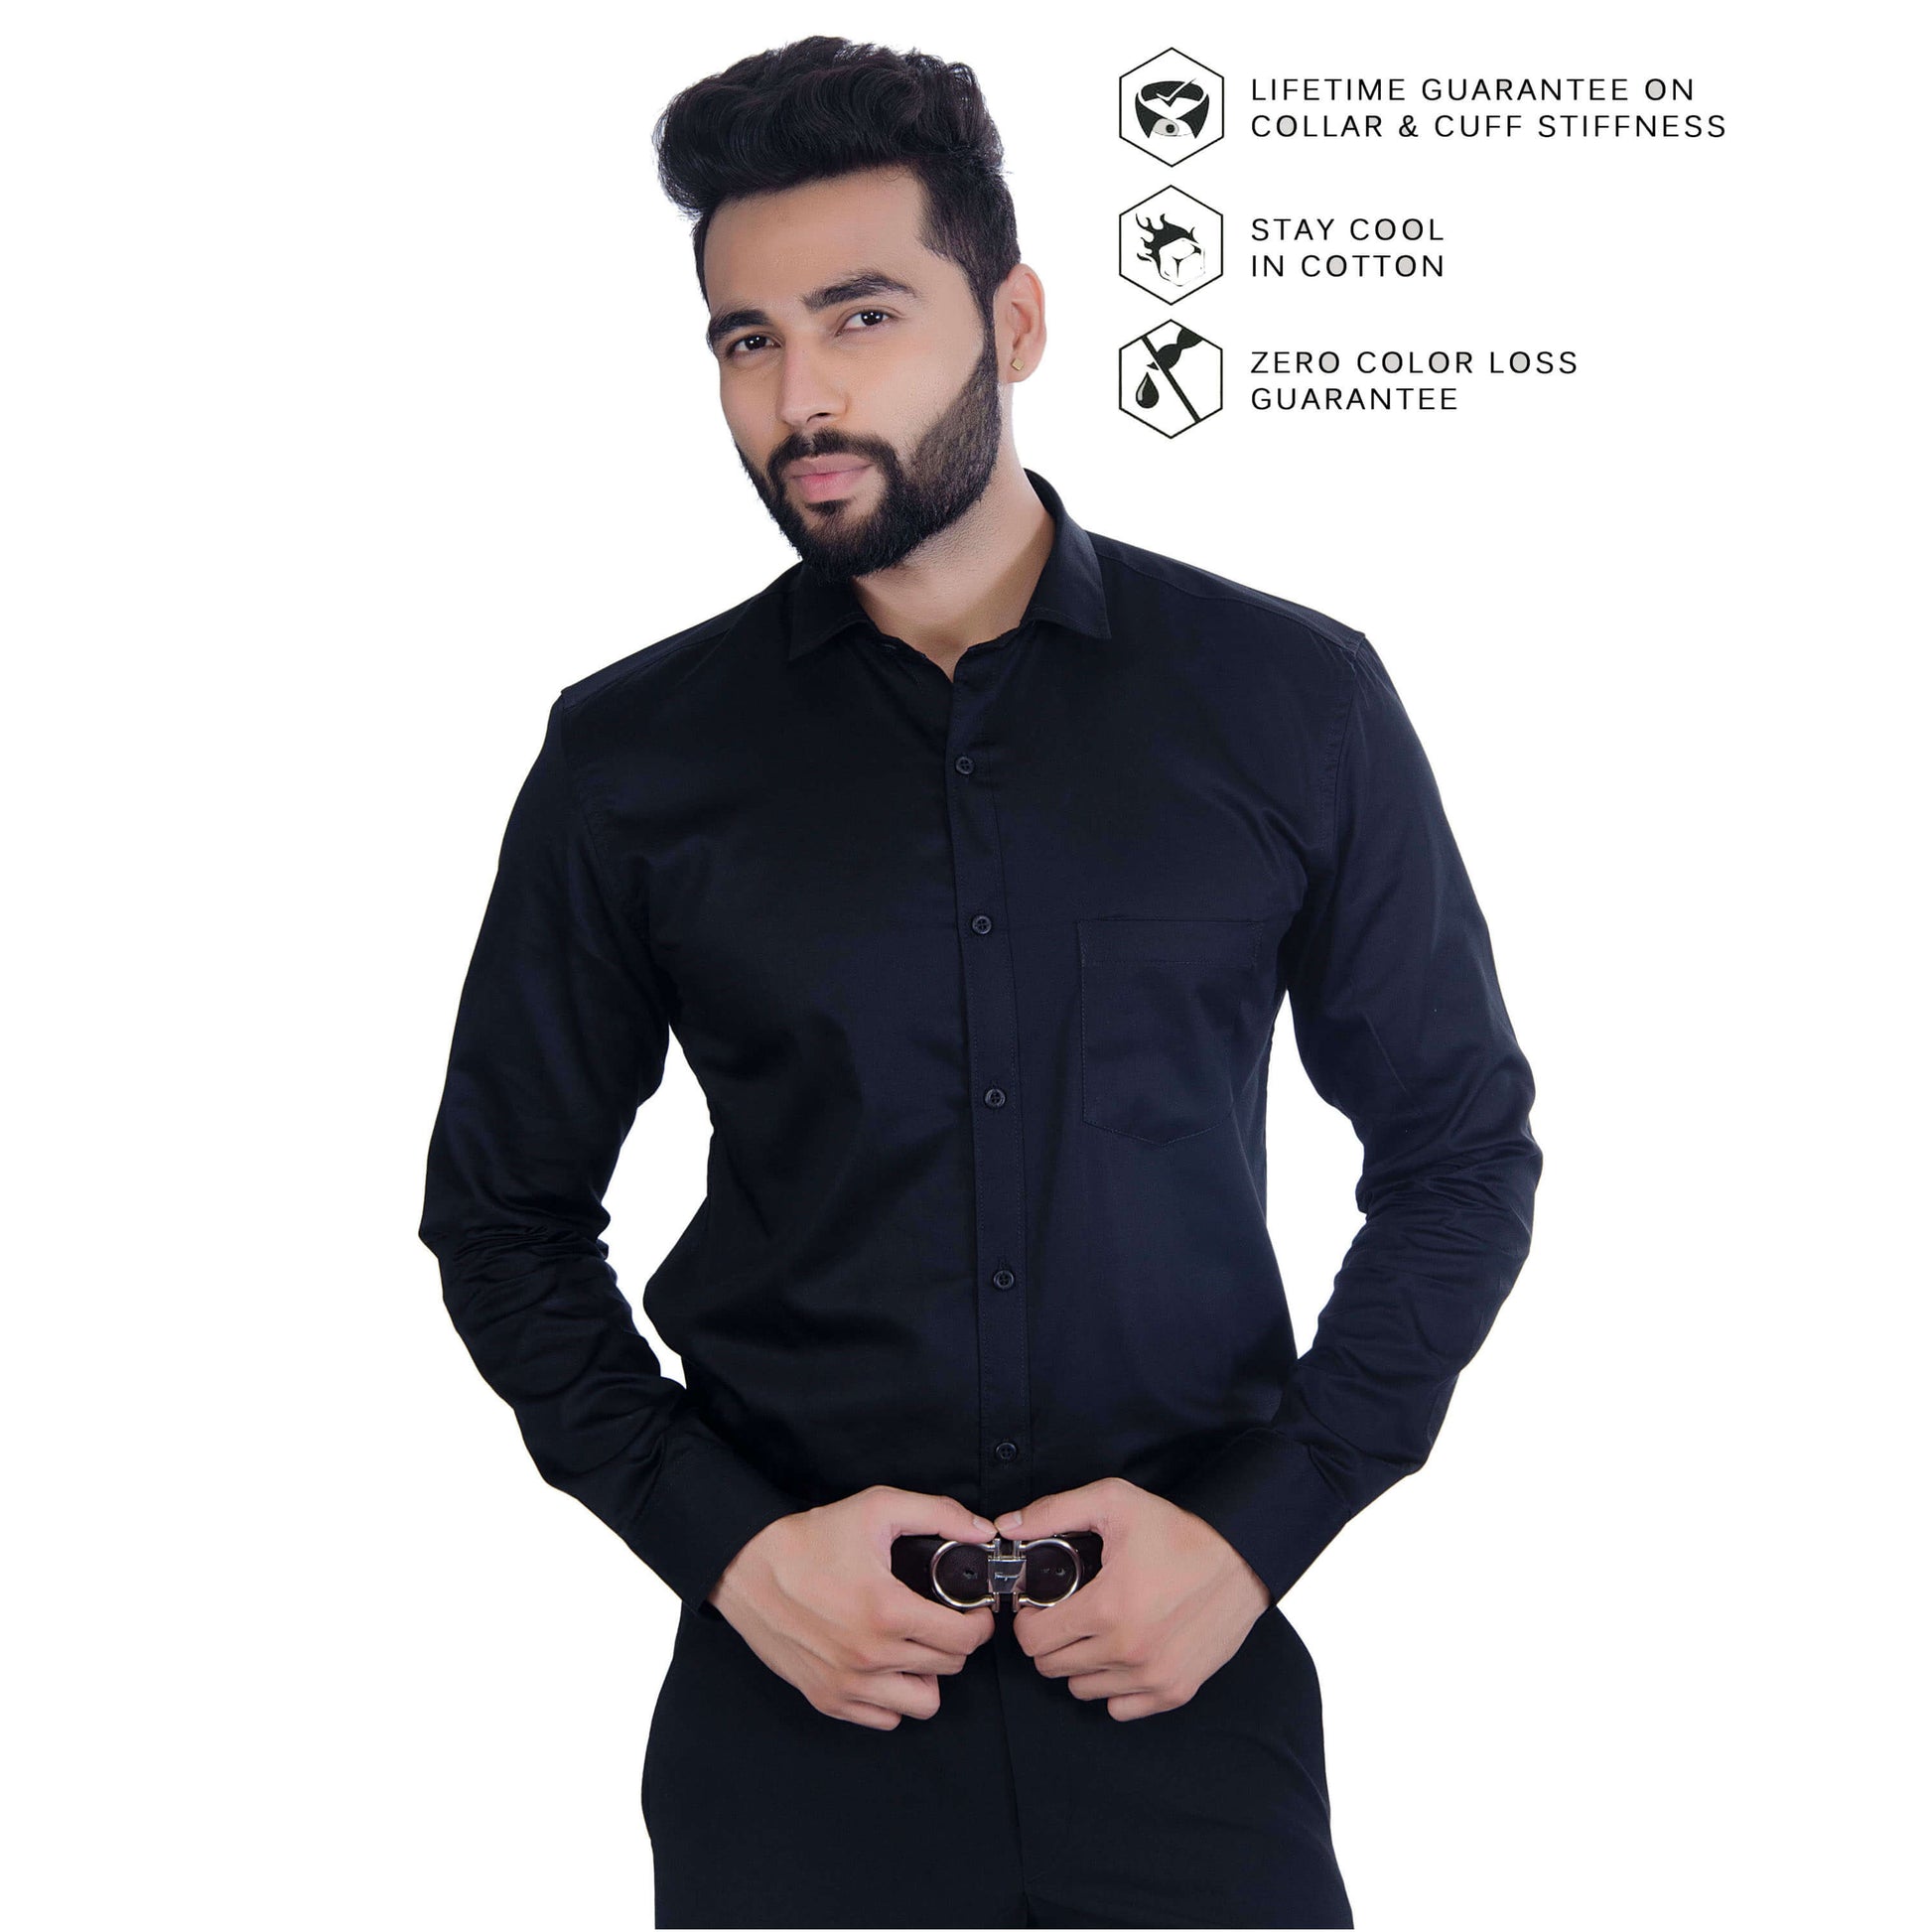 Black nunstitched mill made 100% cotton full width shirt piece for one full sleev shirt